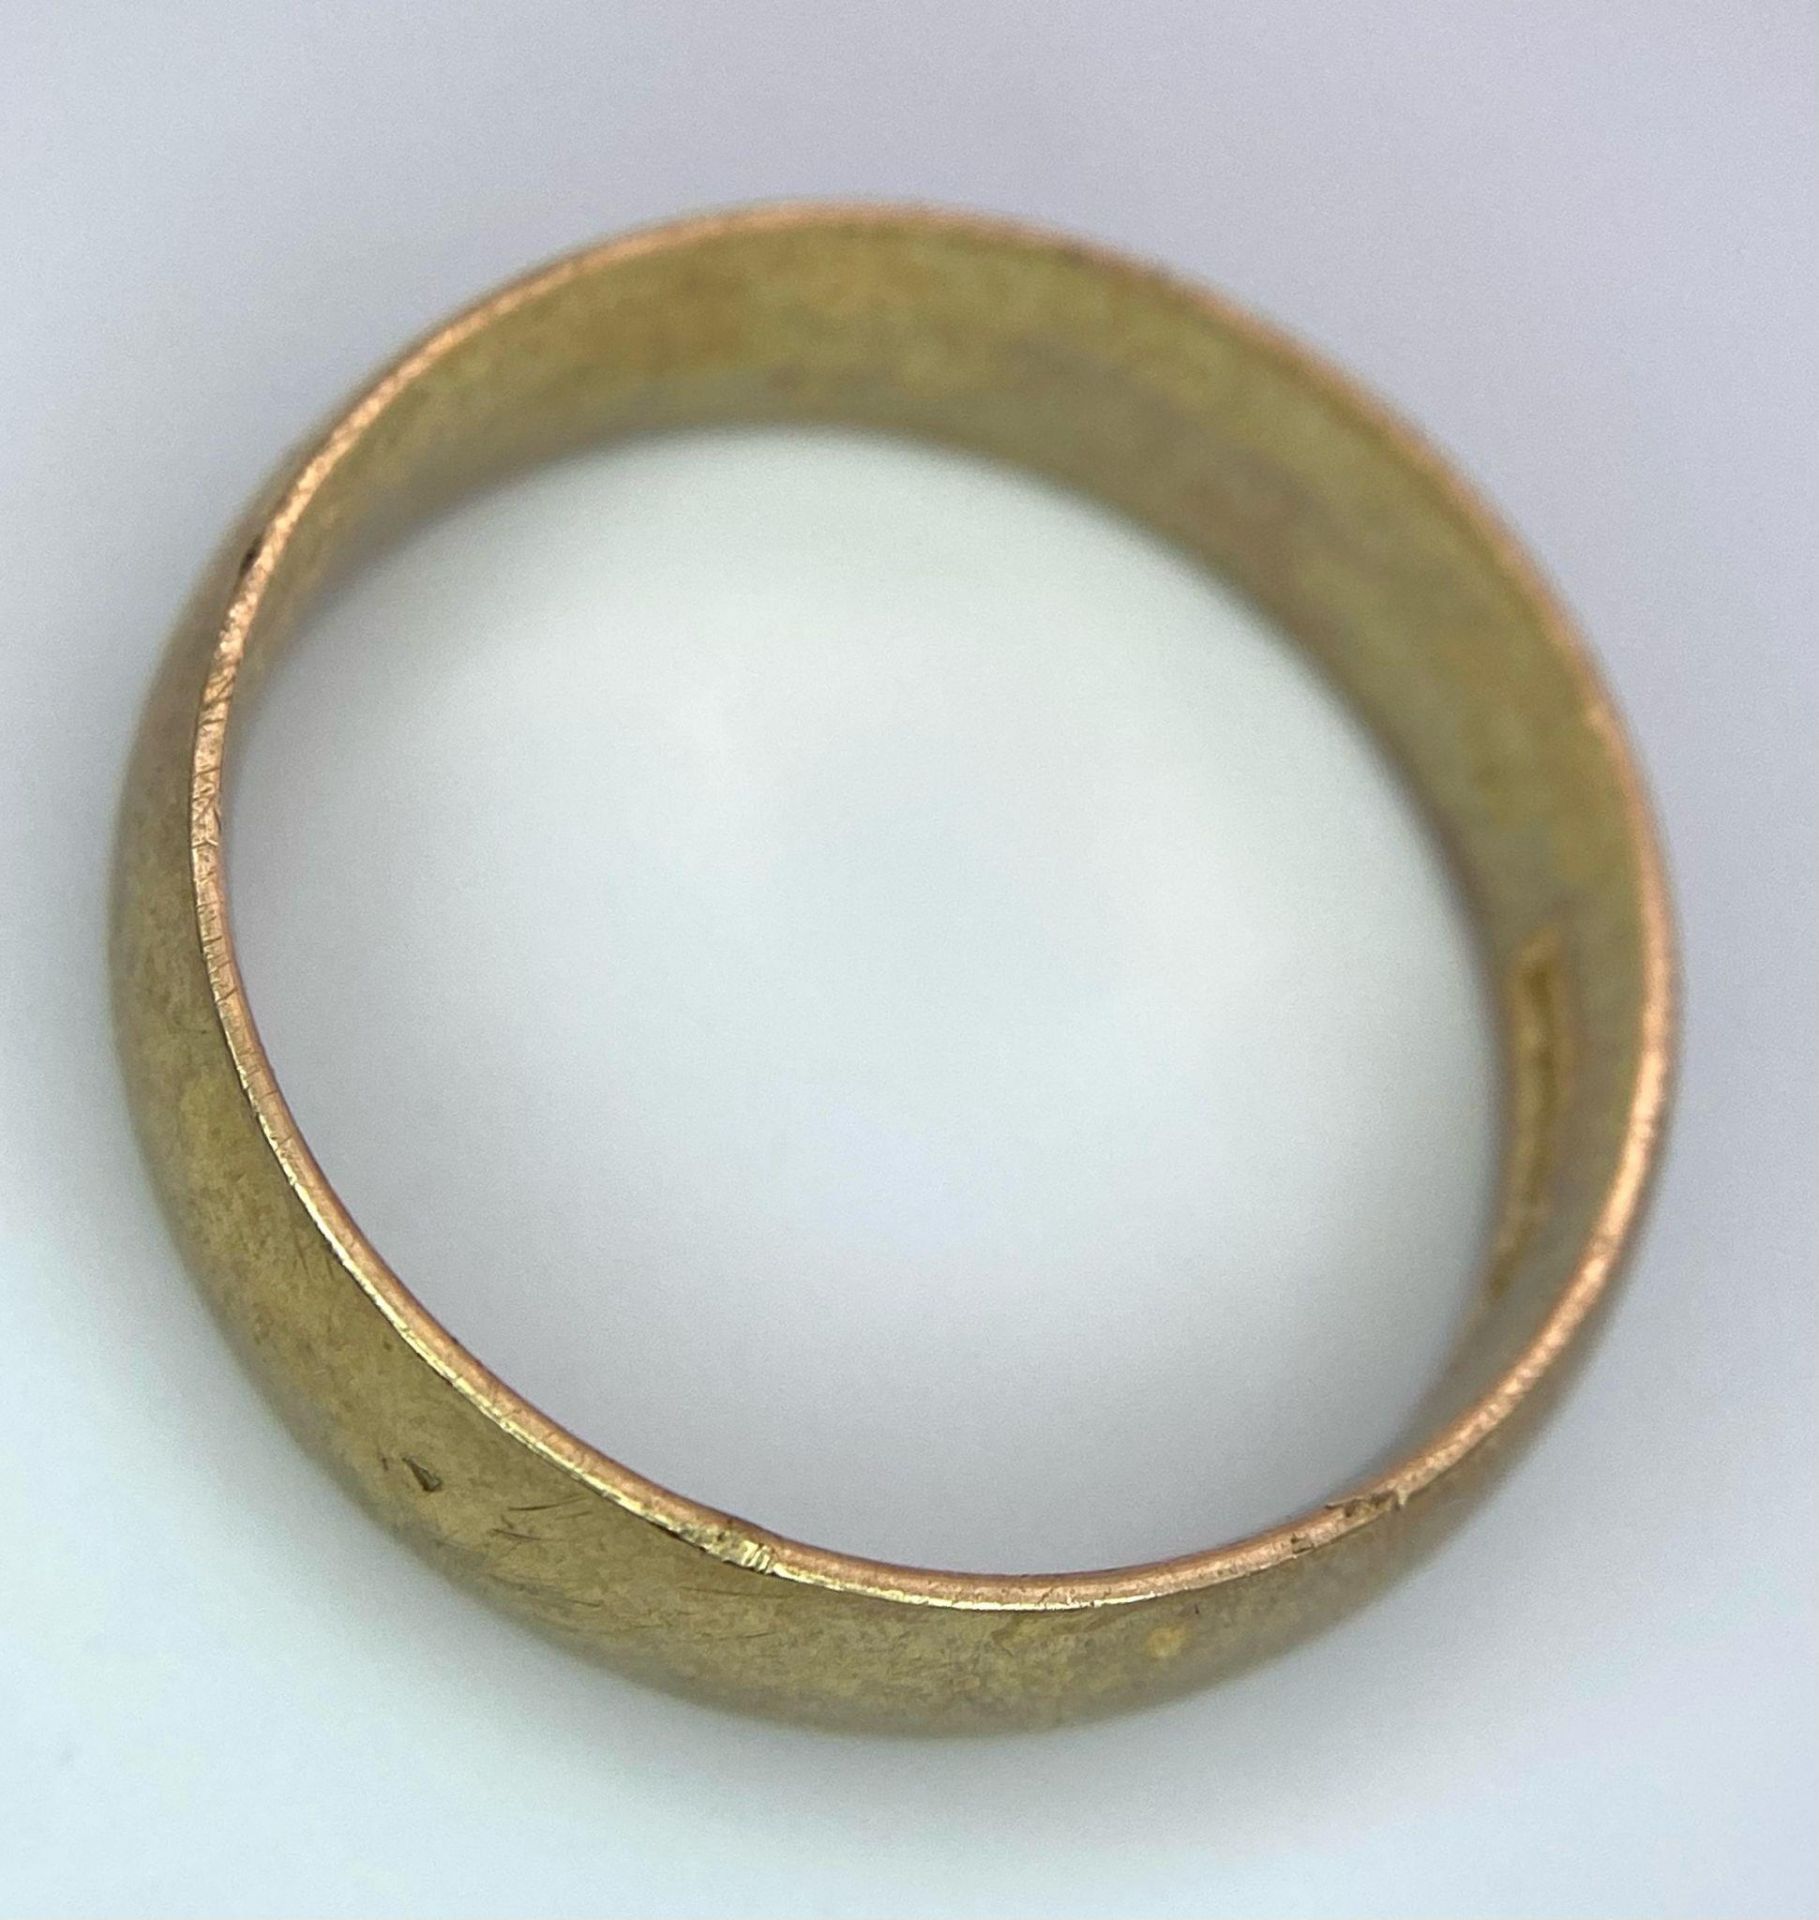 A Vintage 9K Yellow Gold Band Ring. 6mm width. Size T. 5.05g weight. Full UK hallmarks. - Image 4 of 5